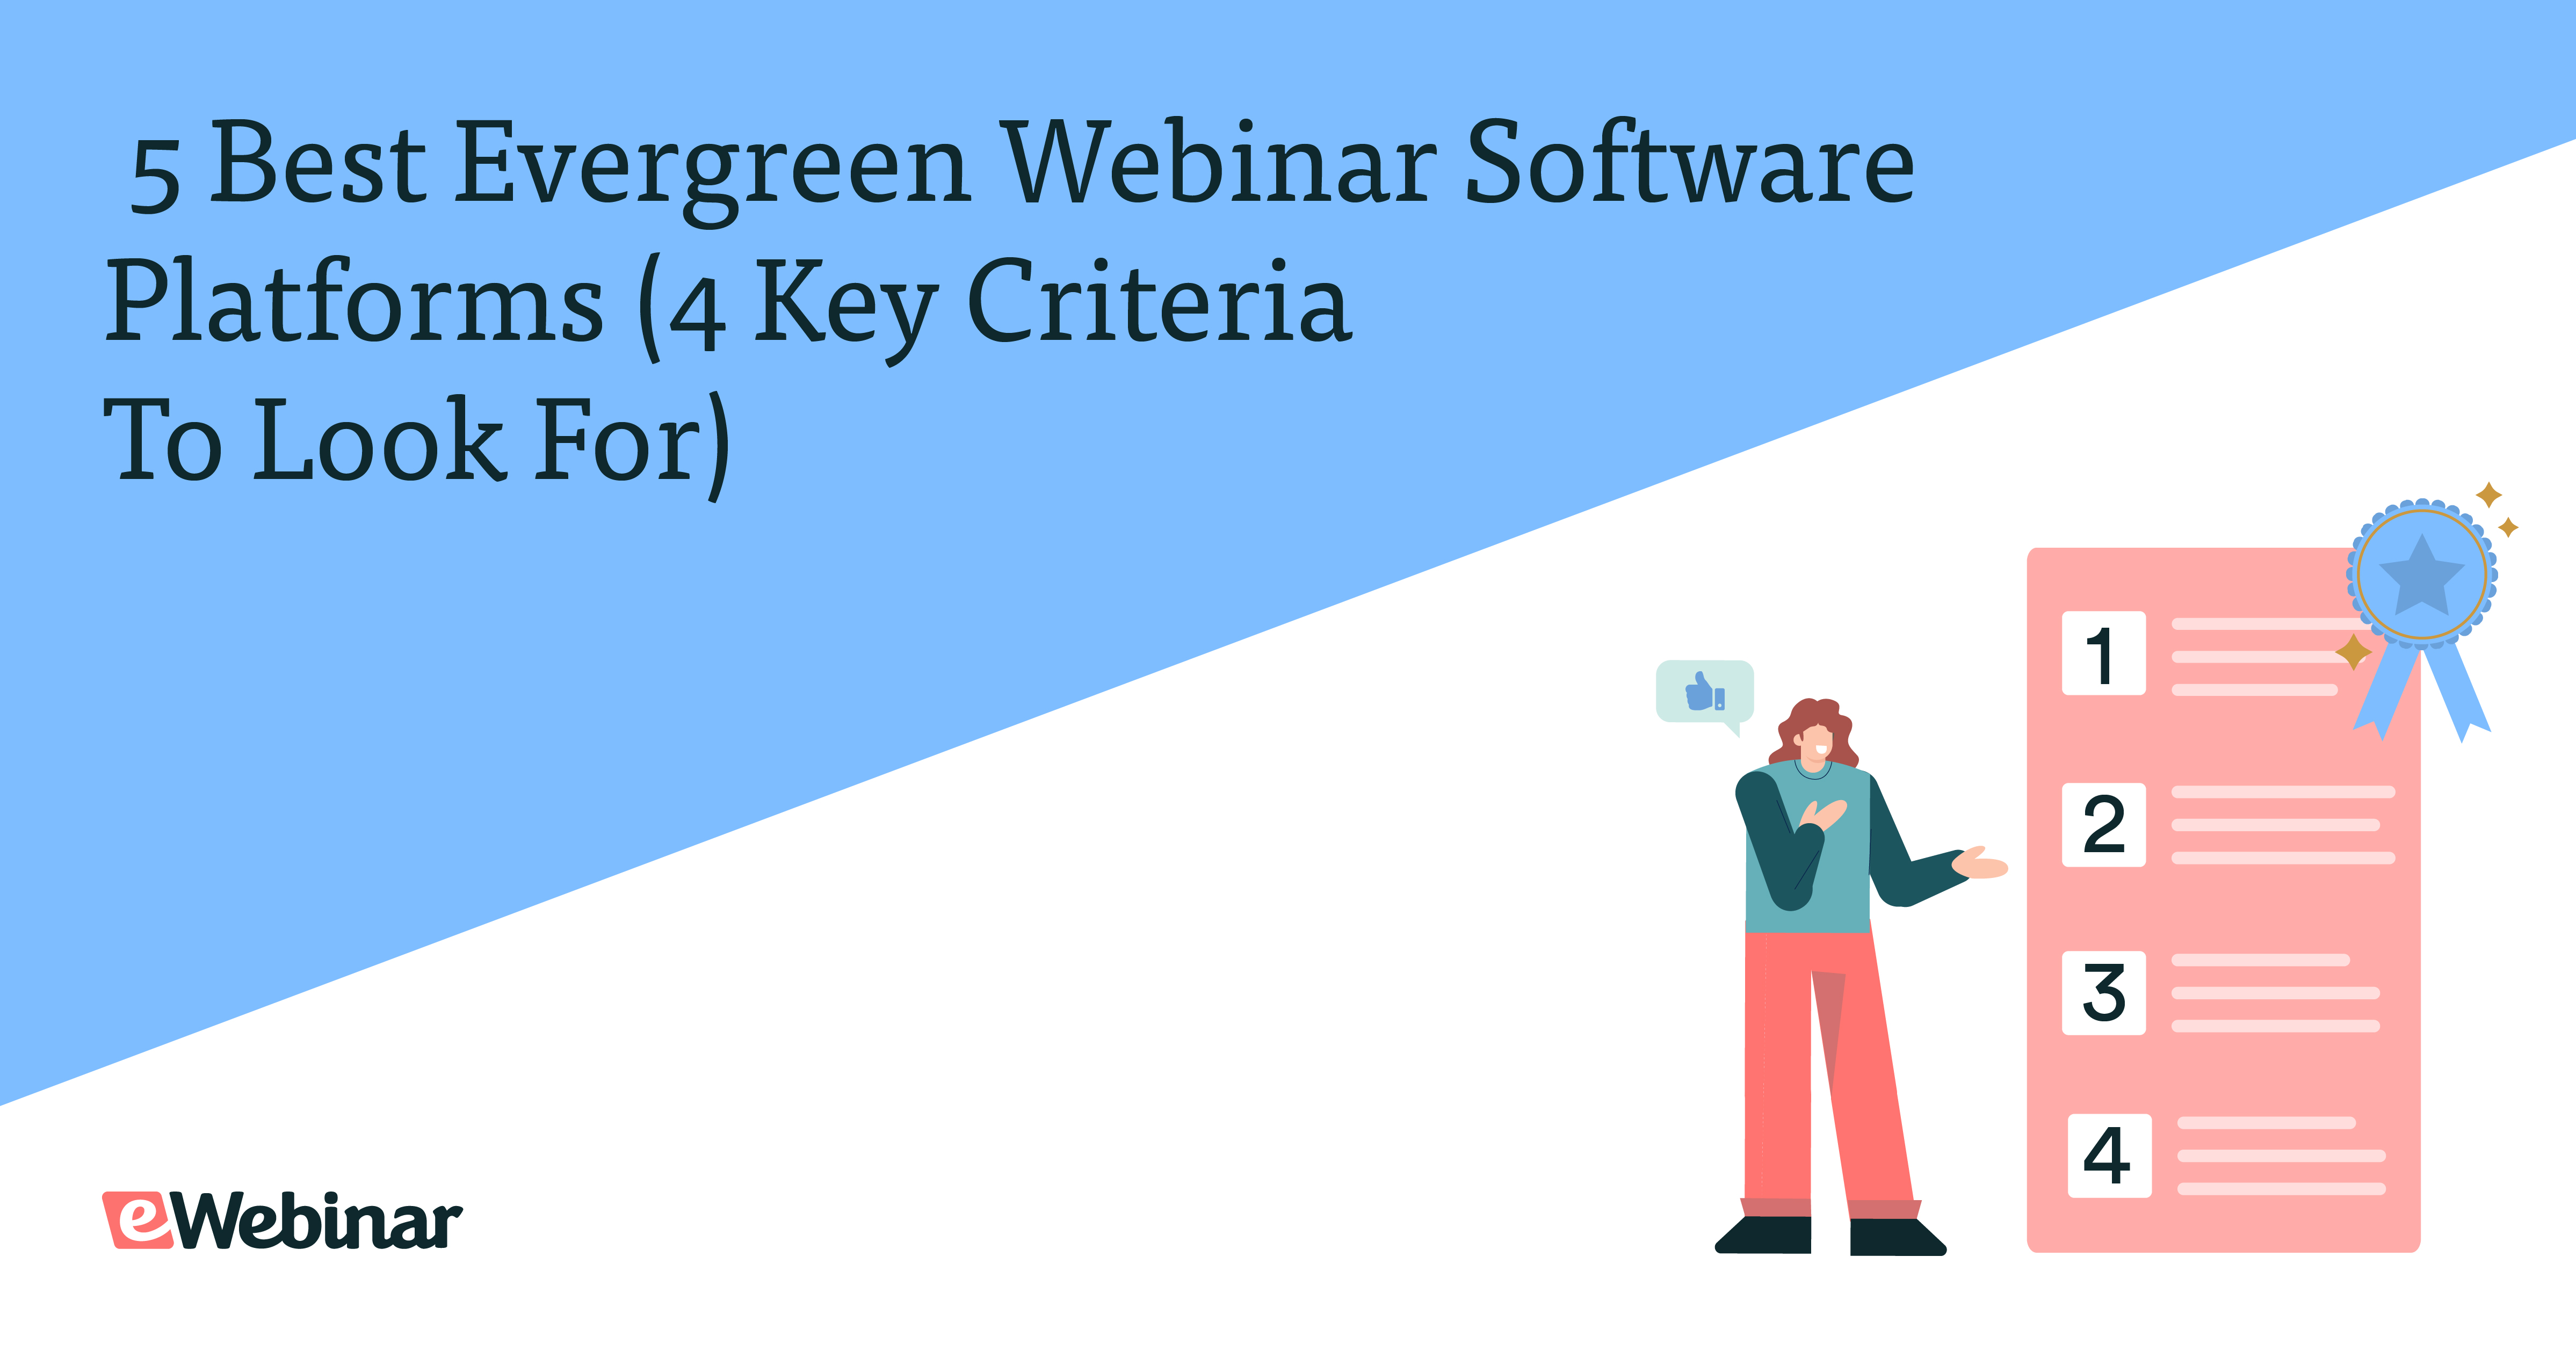 5 Best Evergreen Webinar Software Platforms for Course Creators, Coaches, and Solo Entrepreneurs (4 Key Criteria To Look For)